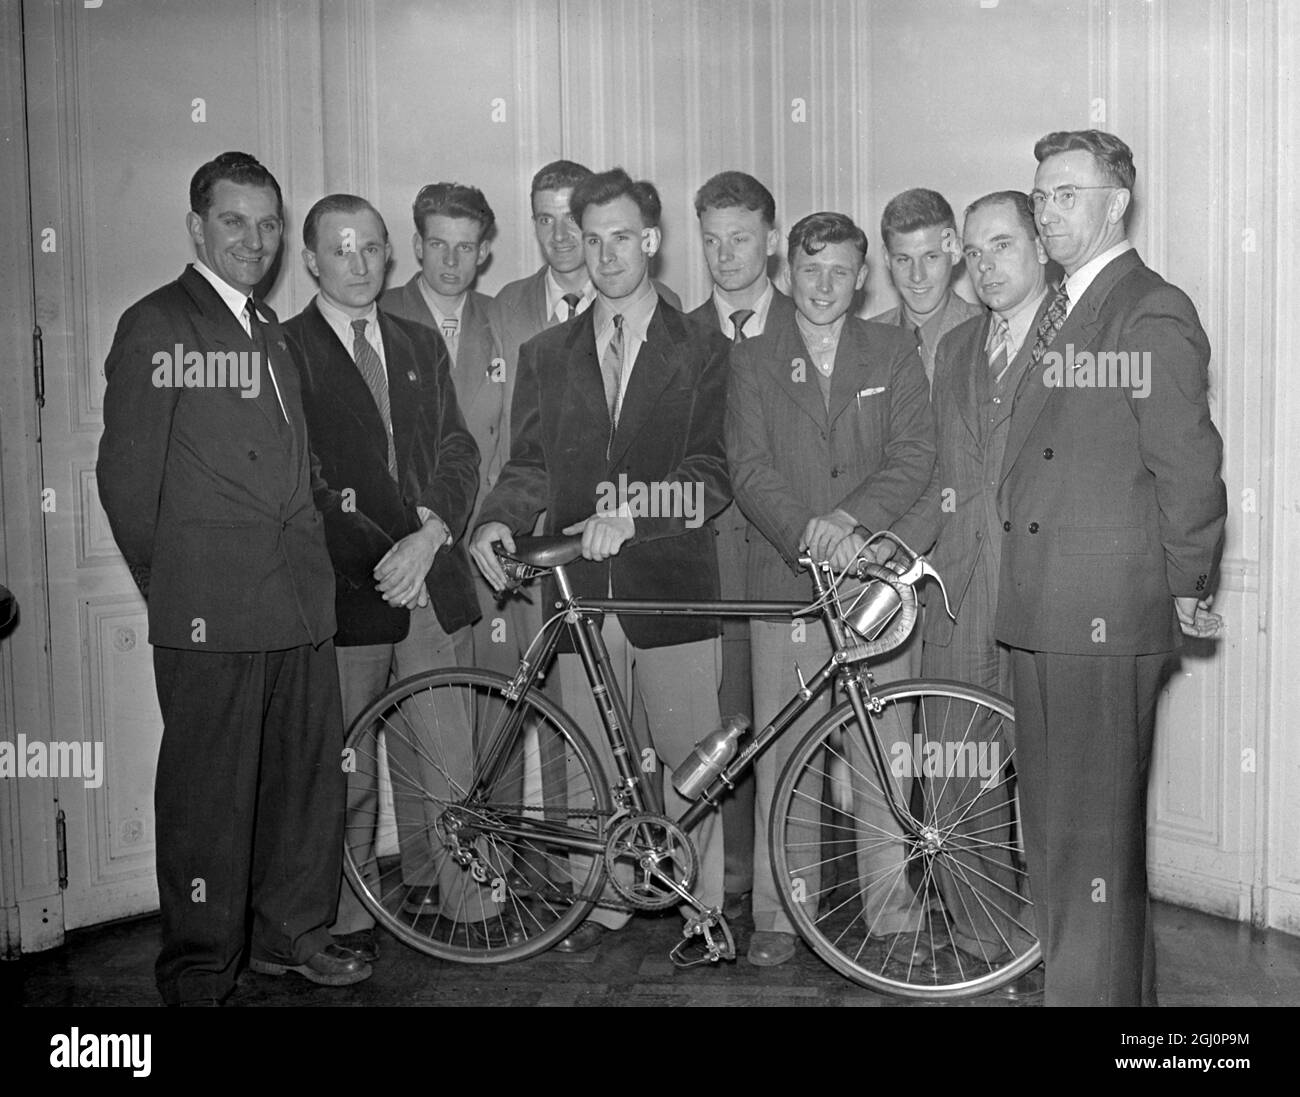 This team from the British League of Racing Cyclists will leave England for Warsaw where they will compete in the Warsaw - Berlin - Prague Cycle RAce , 1952 , starting 30 April and ending on 13 May . The team , consisting of six cyclists , a manager , a masseur , and a mechanic will cover 12 265 miles during the race in which 15 nations are participating . The cyclists are Ian Steel - Glasgow ; Ian Greenfield - Edinburgh ; Bevis Harold Wood - Stalybridge , Cheshire ; Ken Jowett - Bradford ; Les Scales - London and Frank Seel - Manchester . Manager is Percy Stallard - Wolverhampton ; masseur Ch Stock Photo